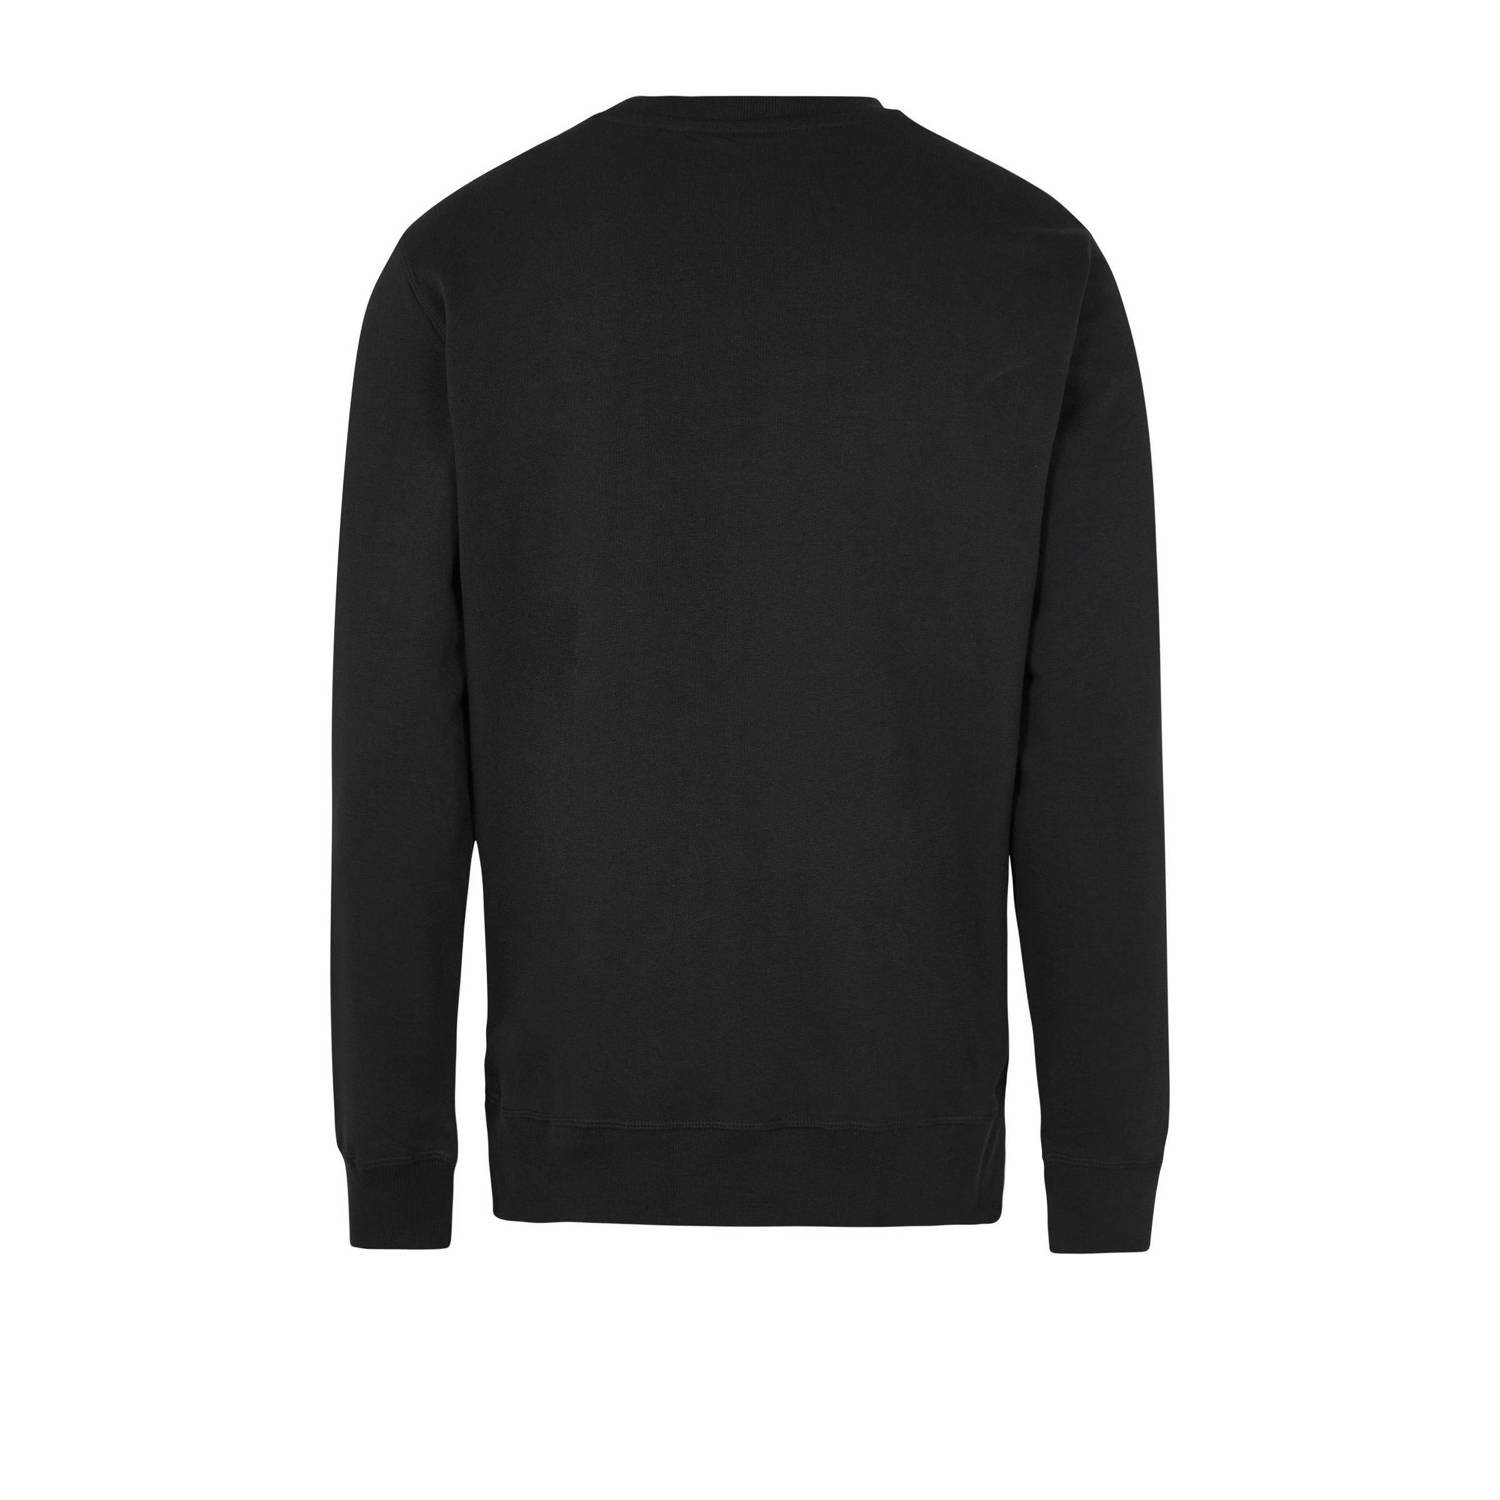 O'Neill sweater met logo black out